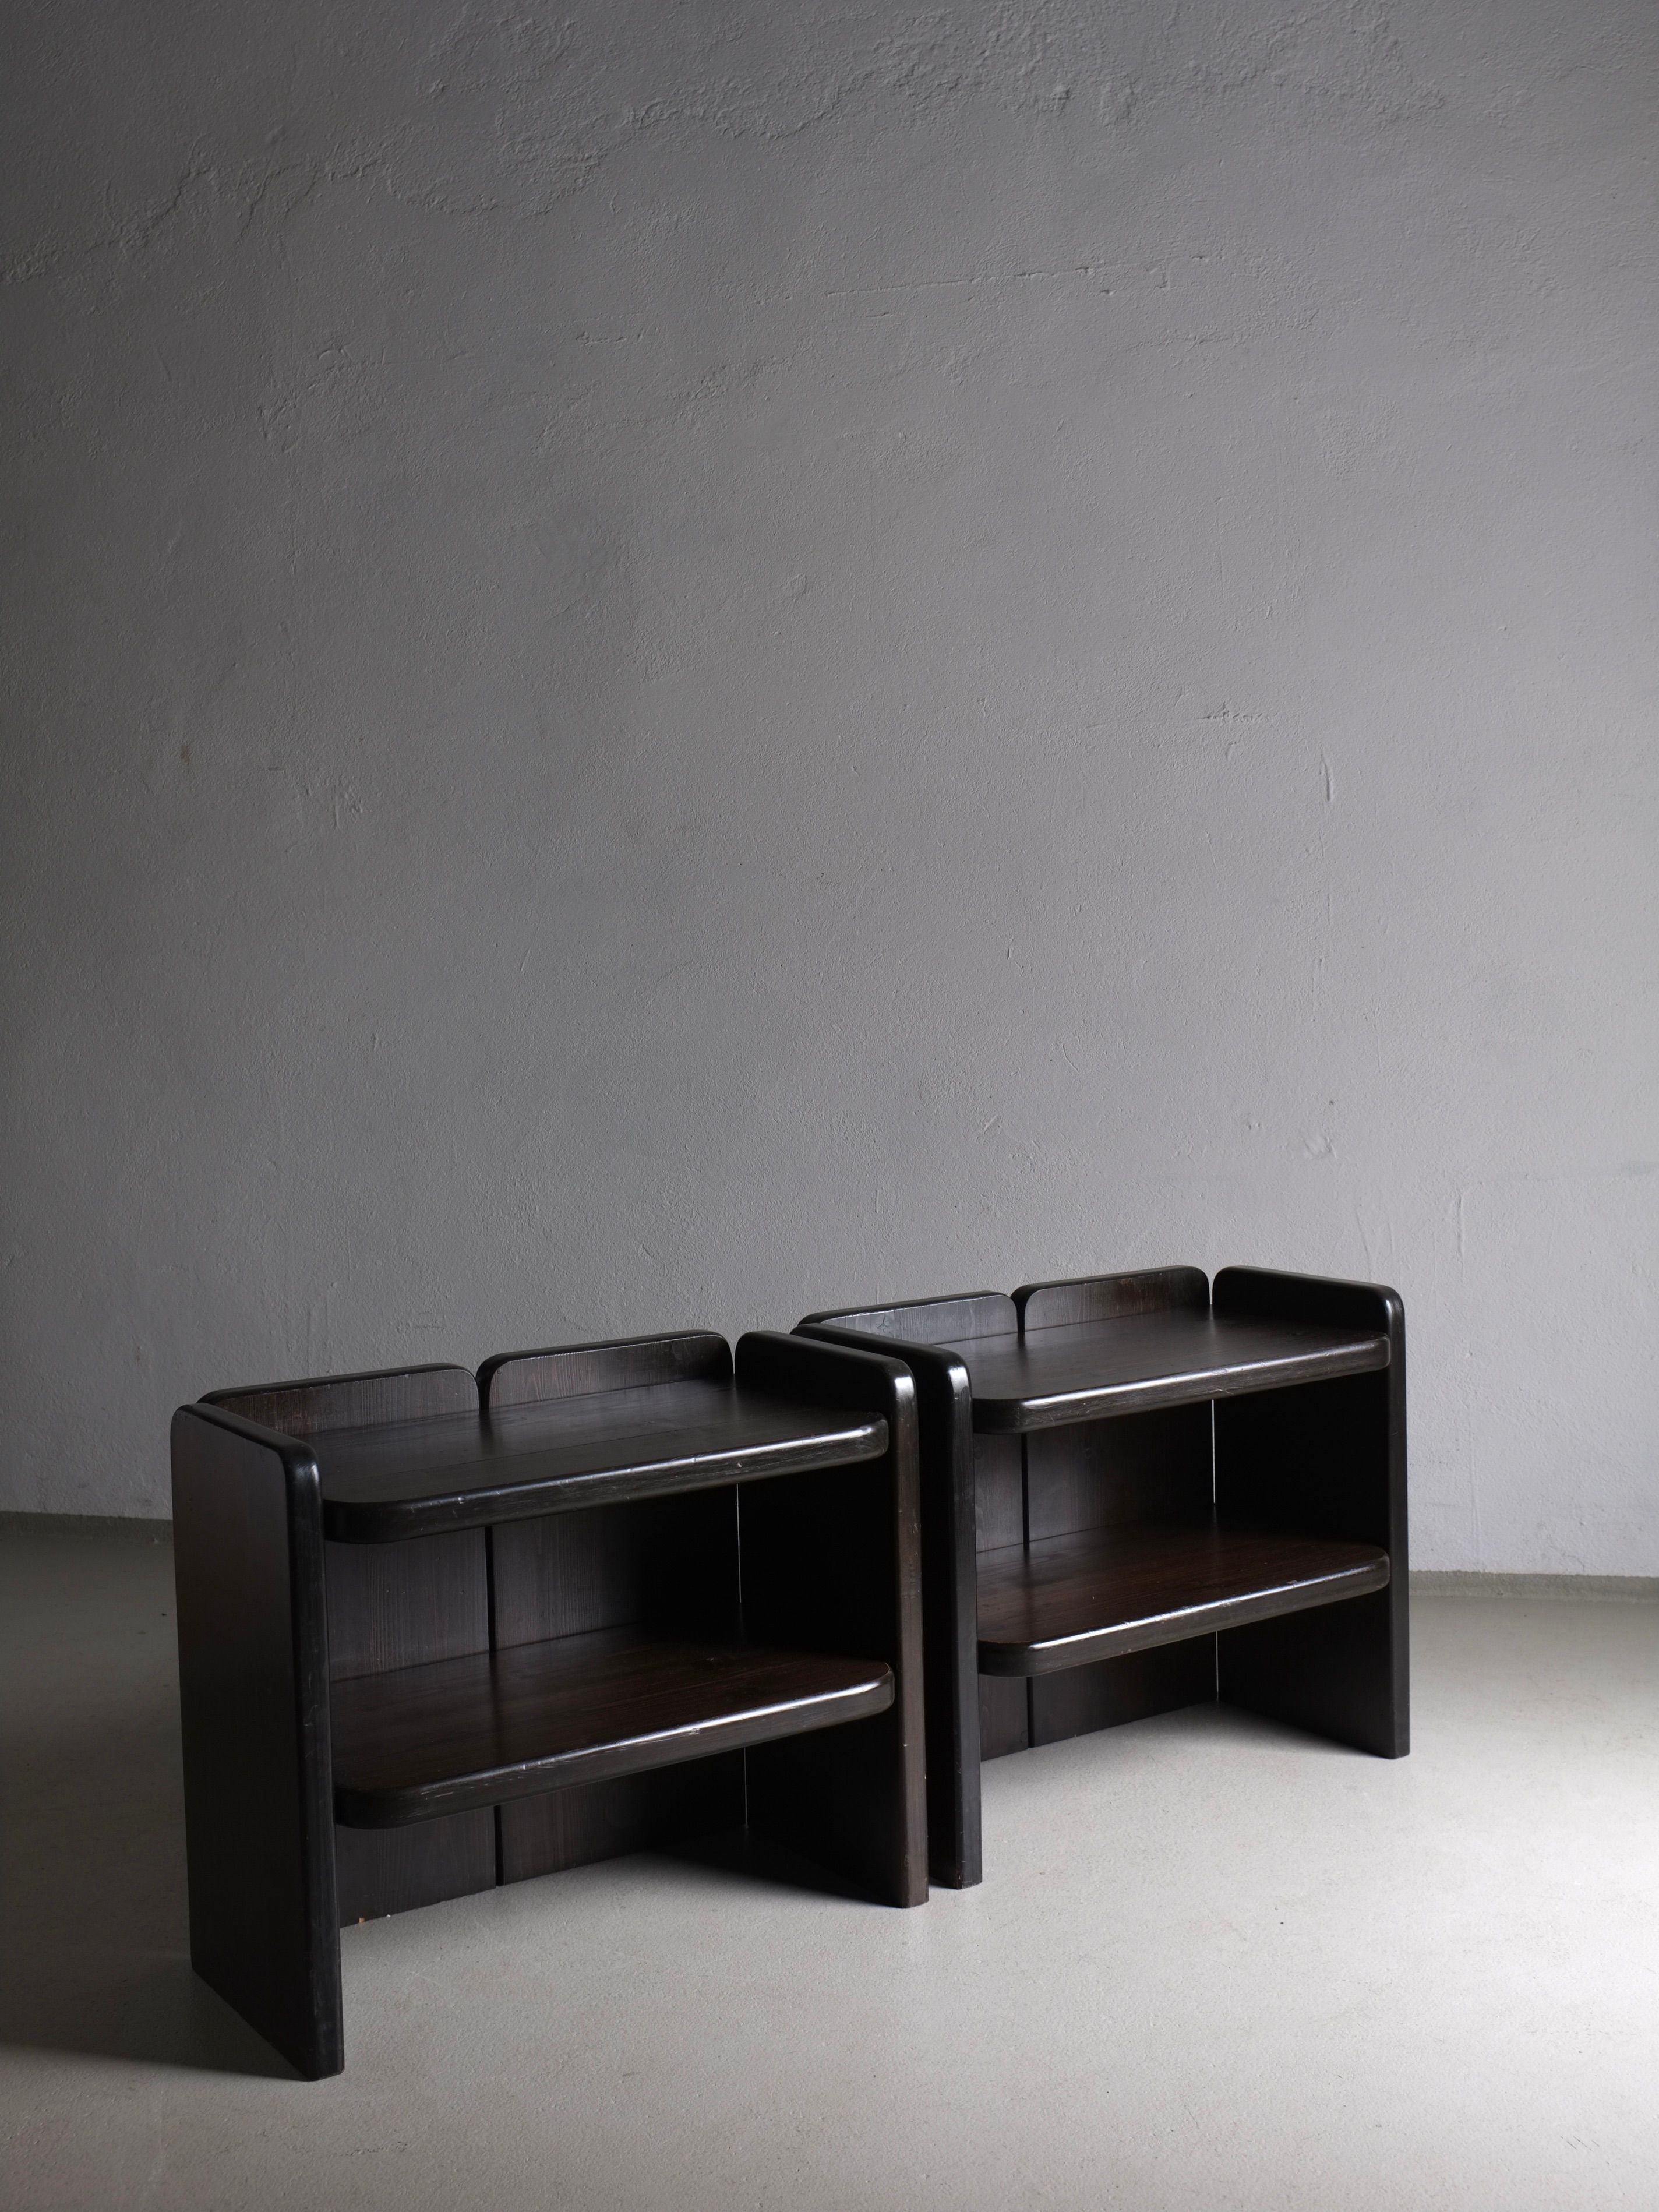 Two sleek, dark wooden 2 Brutalist Dark Wood Night Stands | 1970s by Veter Vintage stand side by side against a plain, light-colored wall. Each nightstand features two shelves with curved edges, showcasing a minimalist, modern design reminiscent of vintage condition. The room's lighting casts soft shadows, highlighting the nightstands' smooth finish.